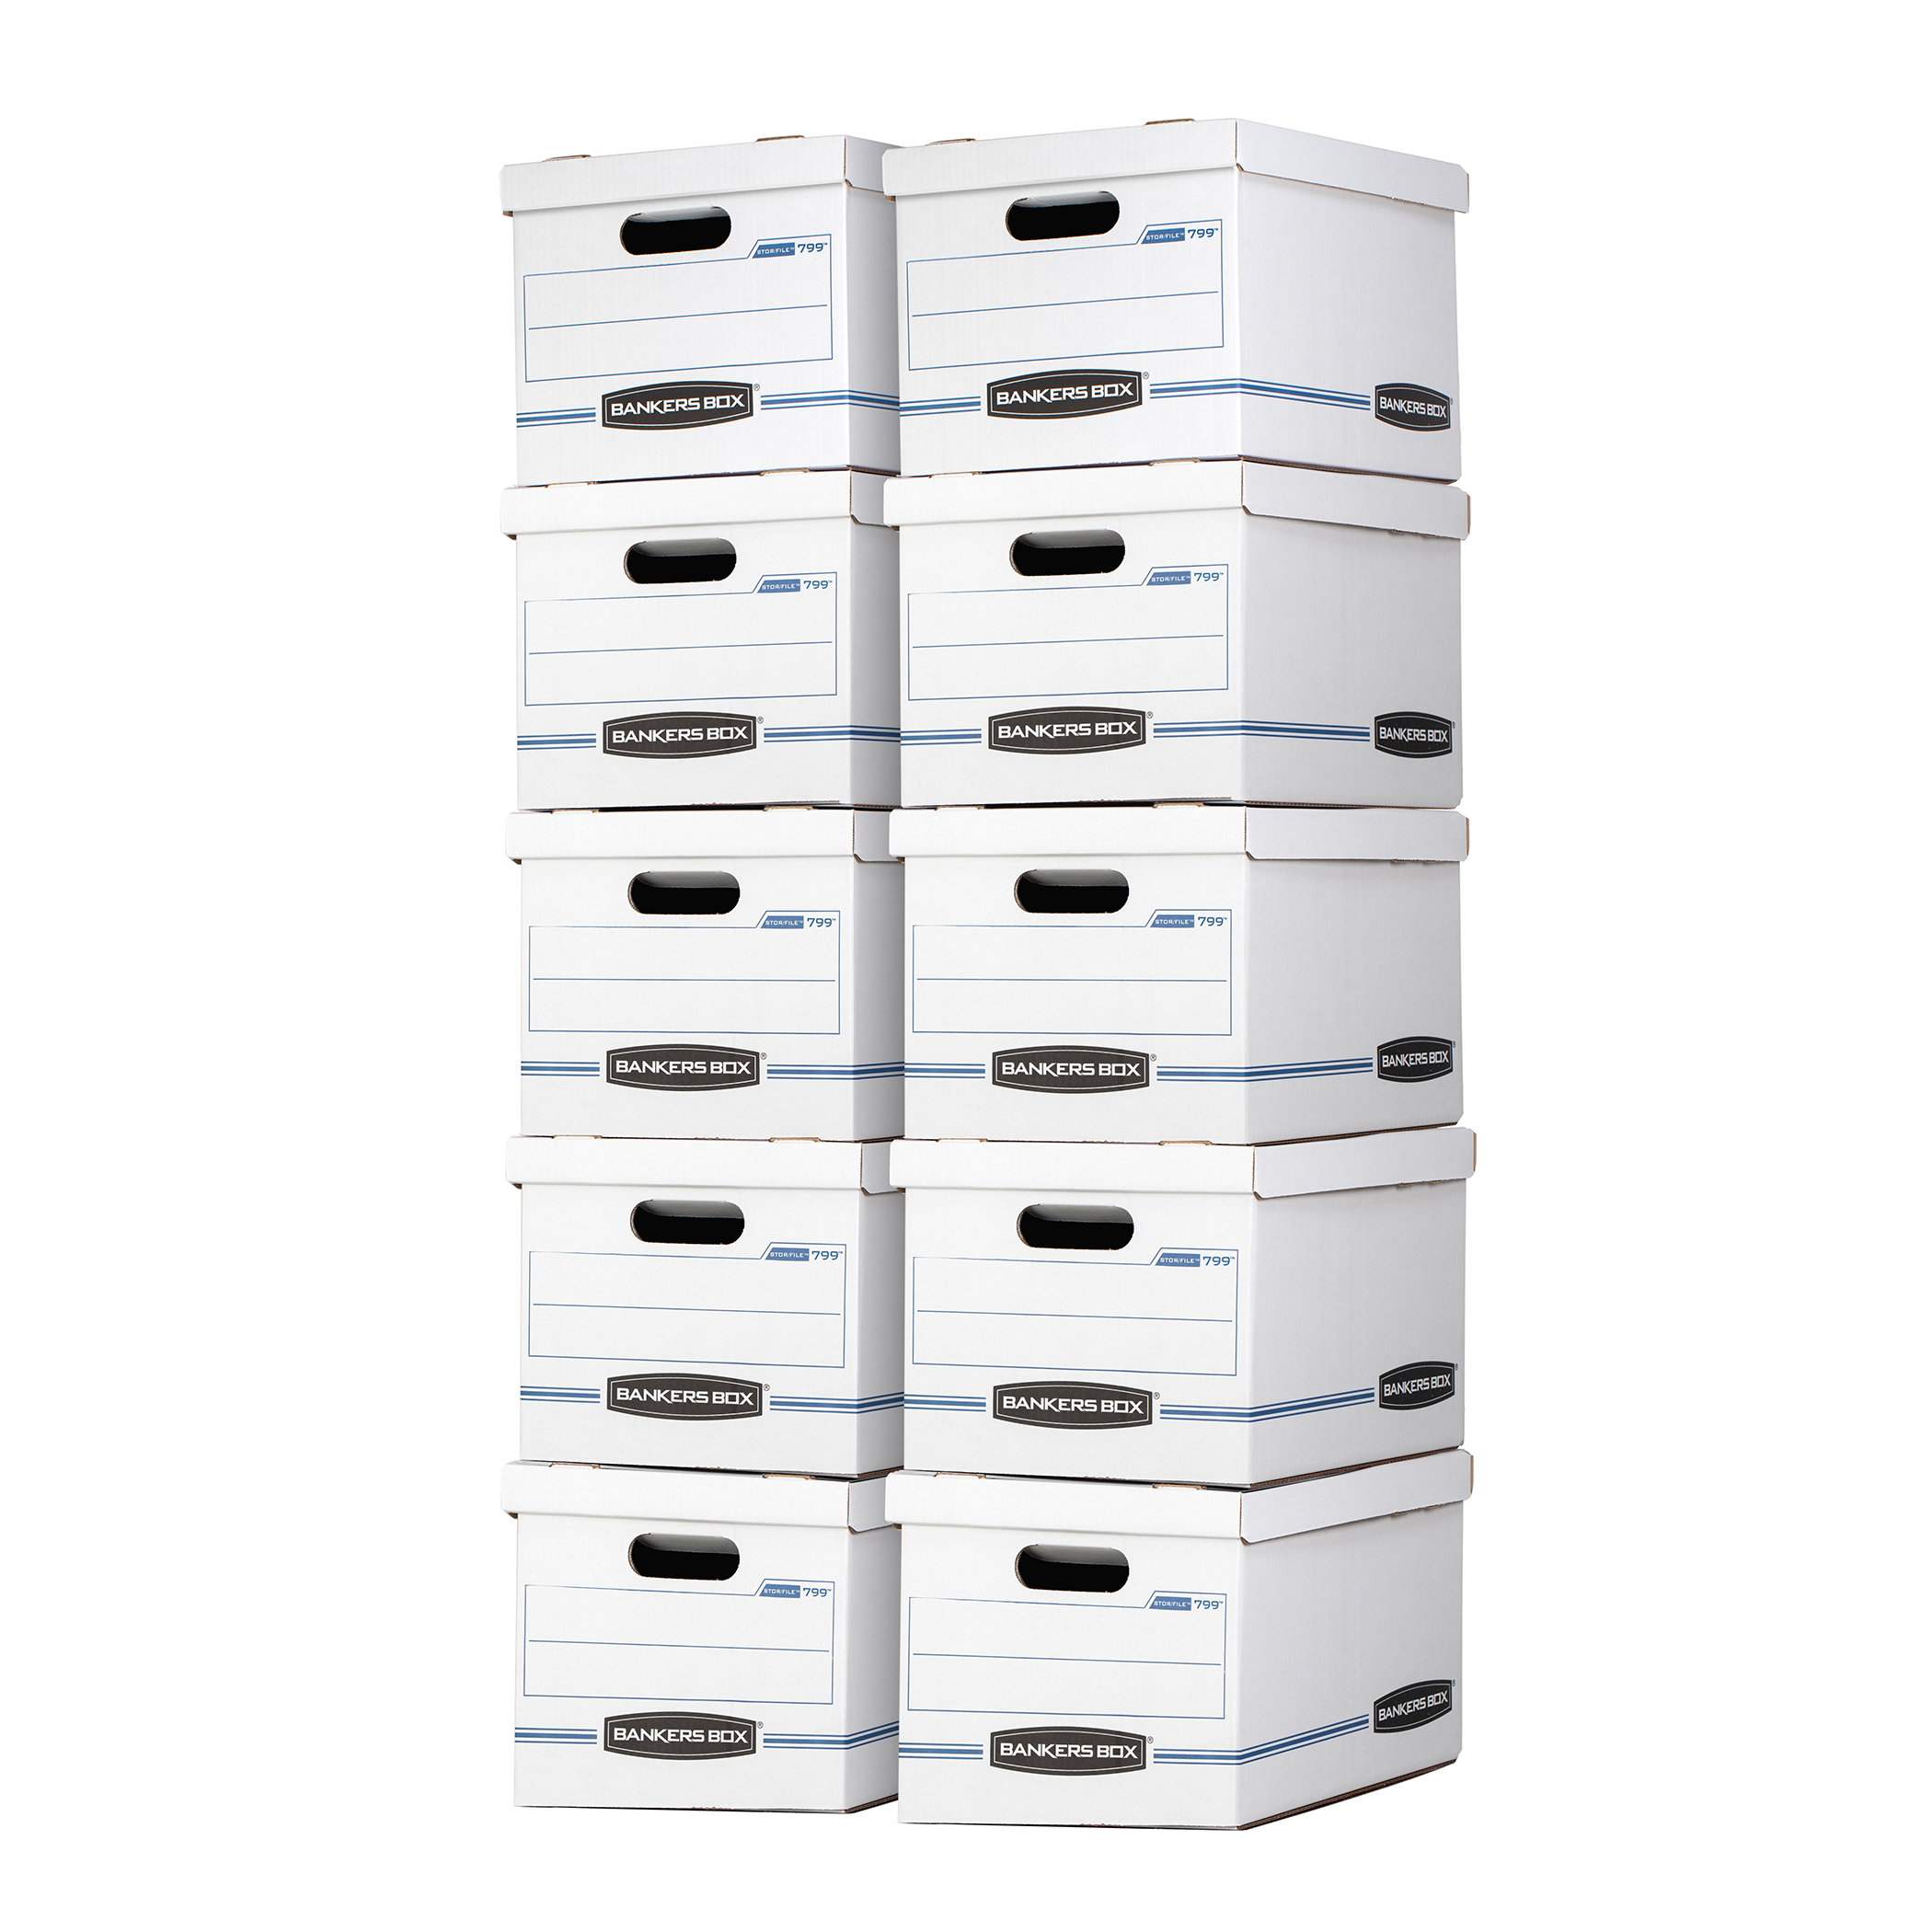 Bankers Box Basic Duty Letter/Legal File Storage Box with Lids, 10 Pack, White - image 1 of 8